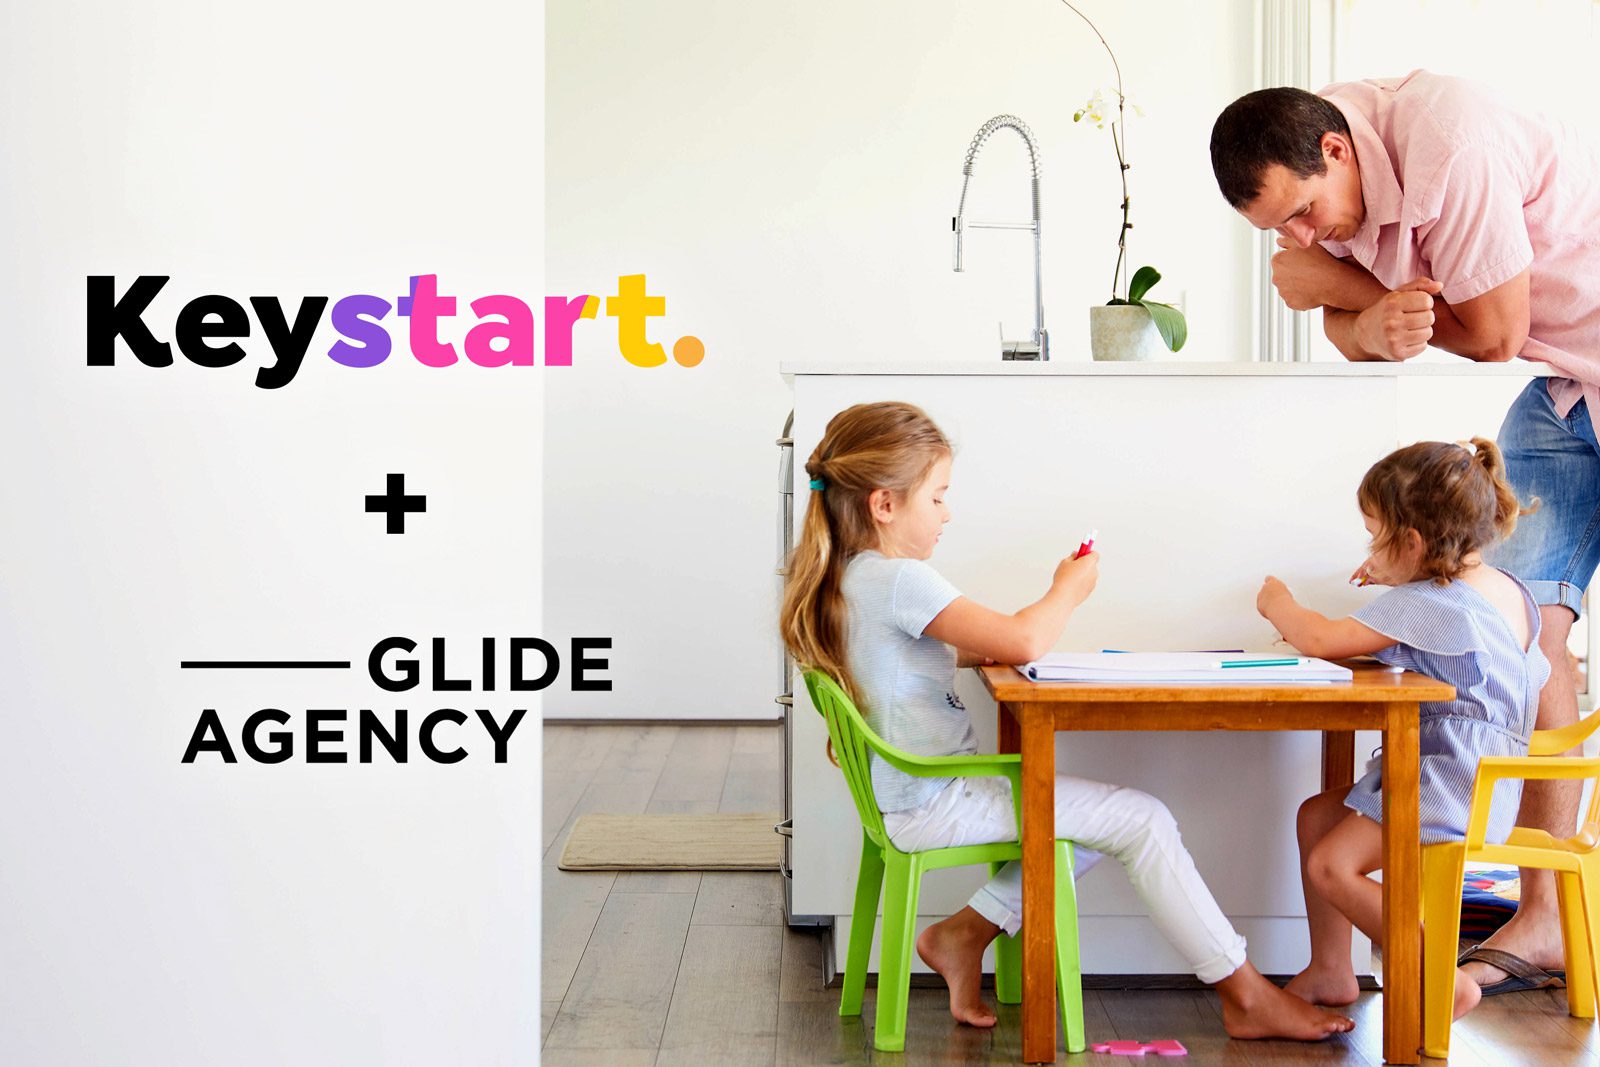 Keystart Appoints Glide Agency to Panel for Home Loan Campaigns